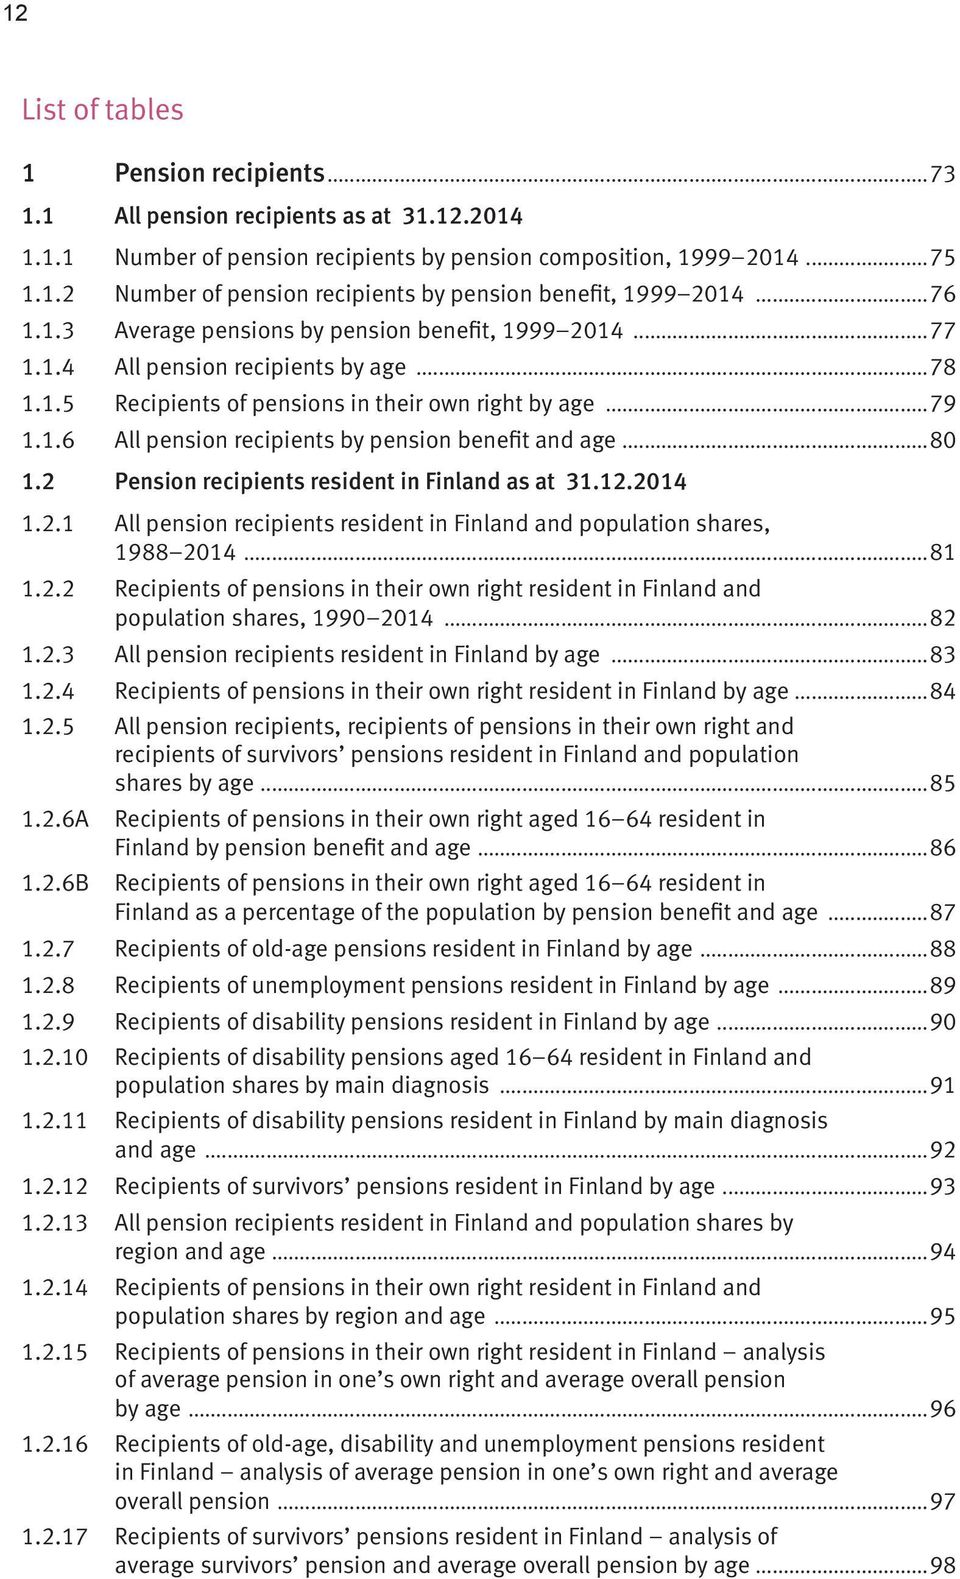 ..80 1.2 Pension recipients resident in Finland as at 31.12.2014 1.2.1 All pension recipients resident in Finland and population shares, 1988 2014...81 1.2.2 Recipients of pensions in their own right resident in Finland and population shares, 1990 2014.